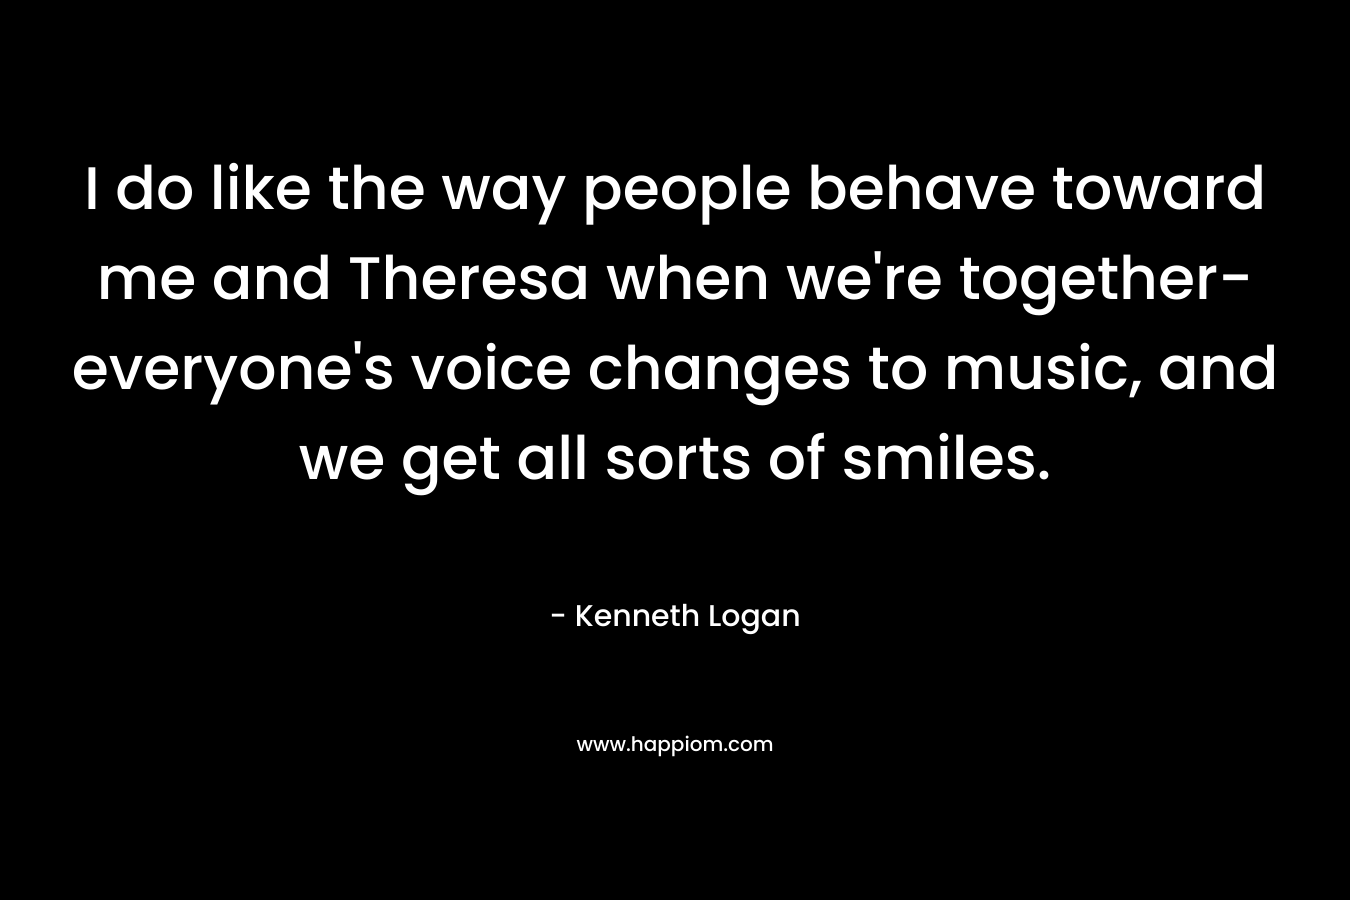 I do like the way people behave toward me and Theresa when we’re together-everyone’s voice changes to music, and we get all sorts of smiles. – Kenneth Logan